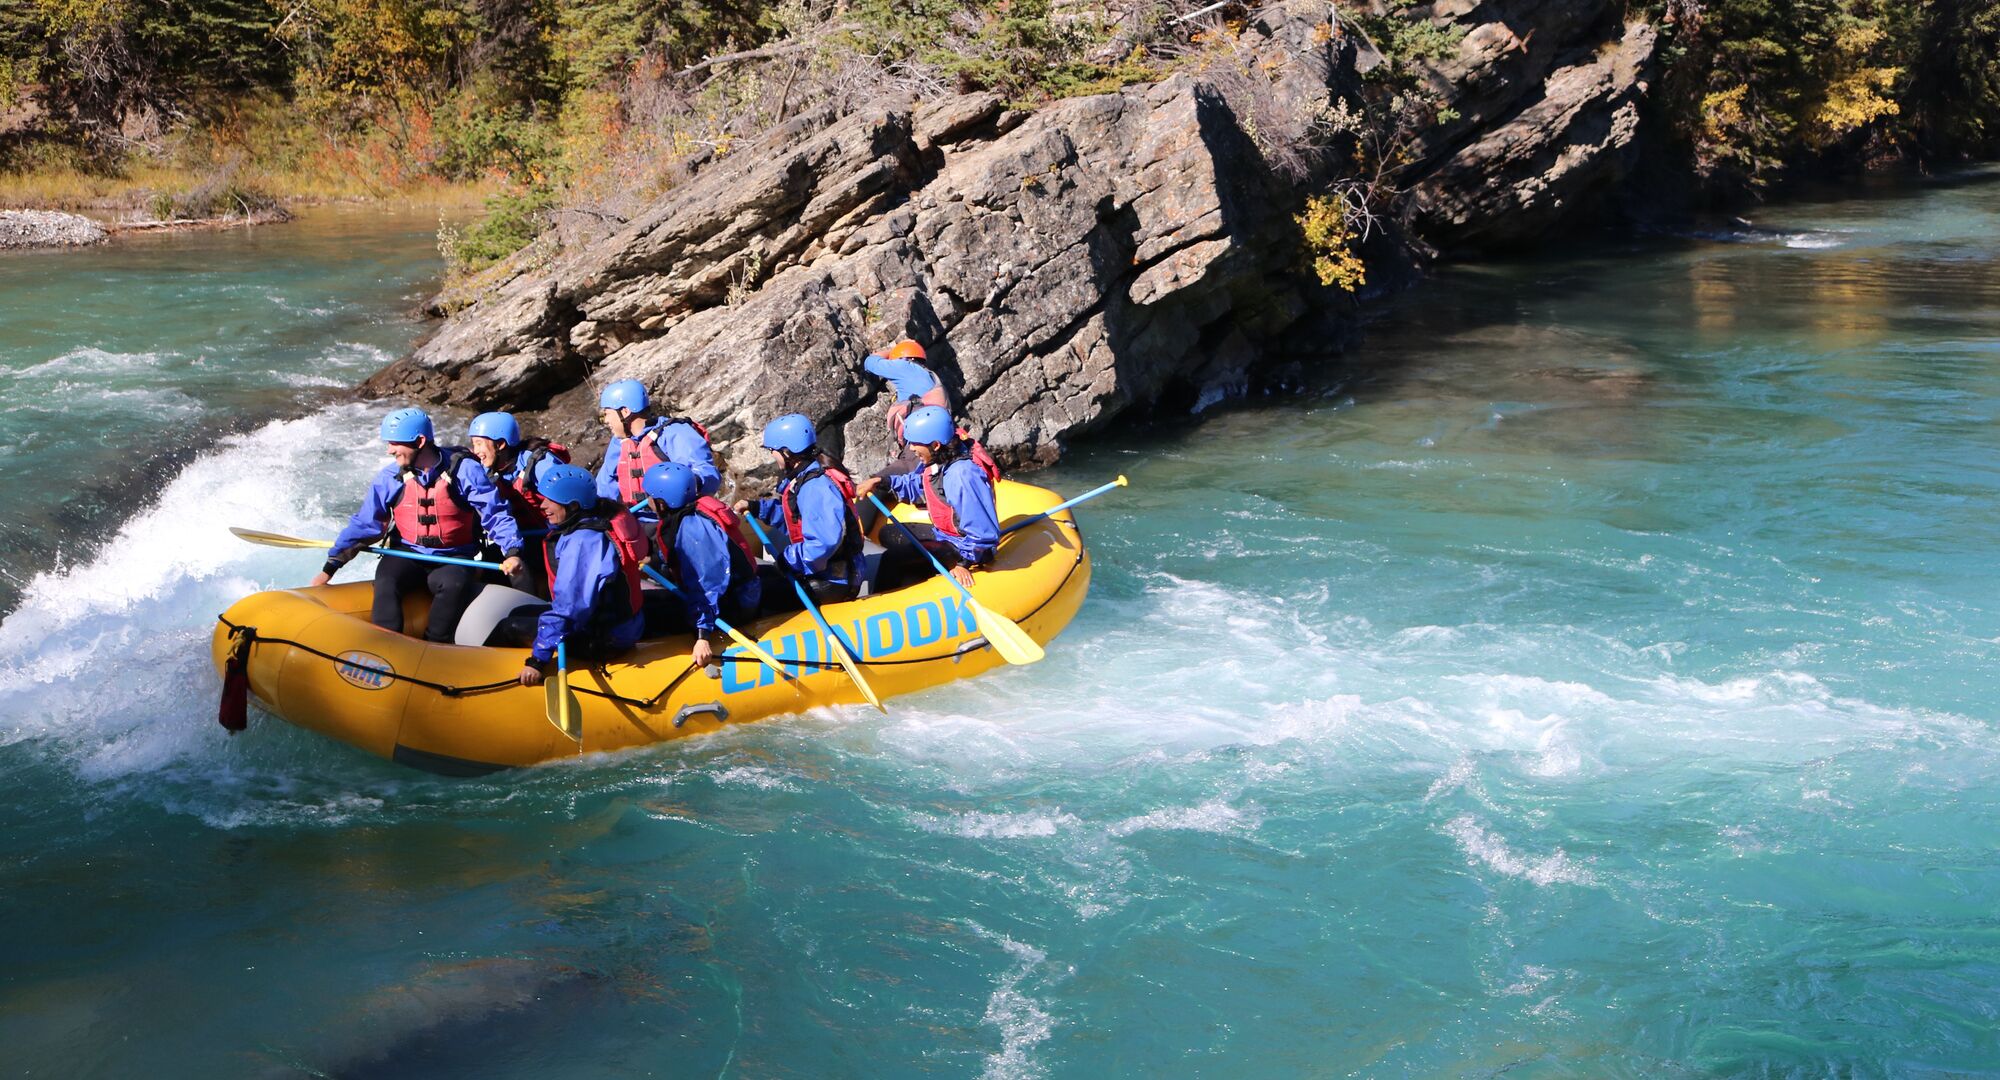 Group of people white water rafting in the Canadian Rockies